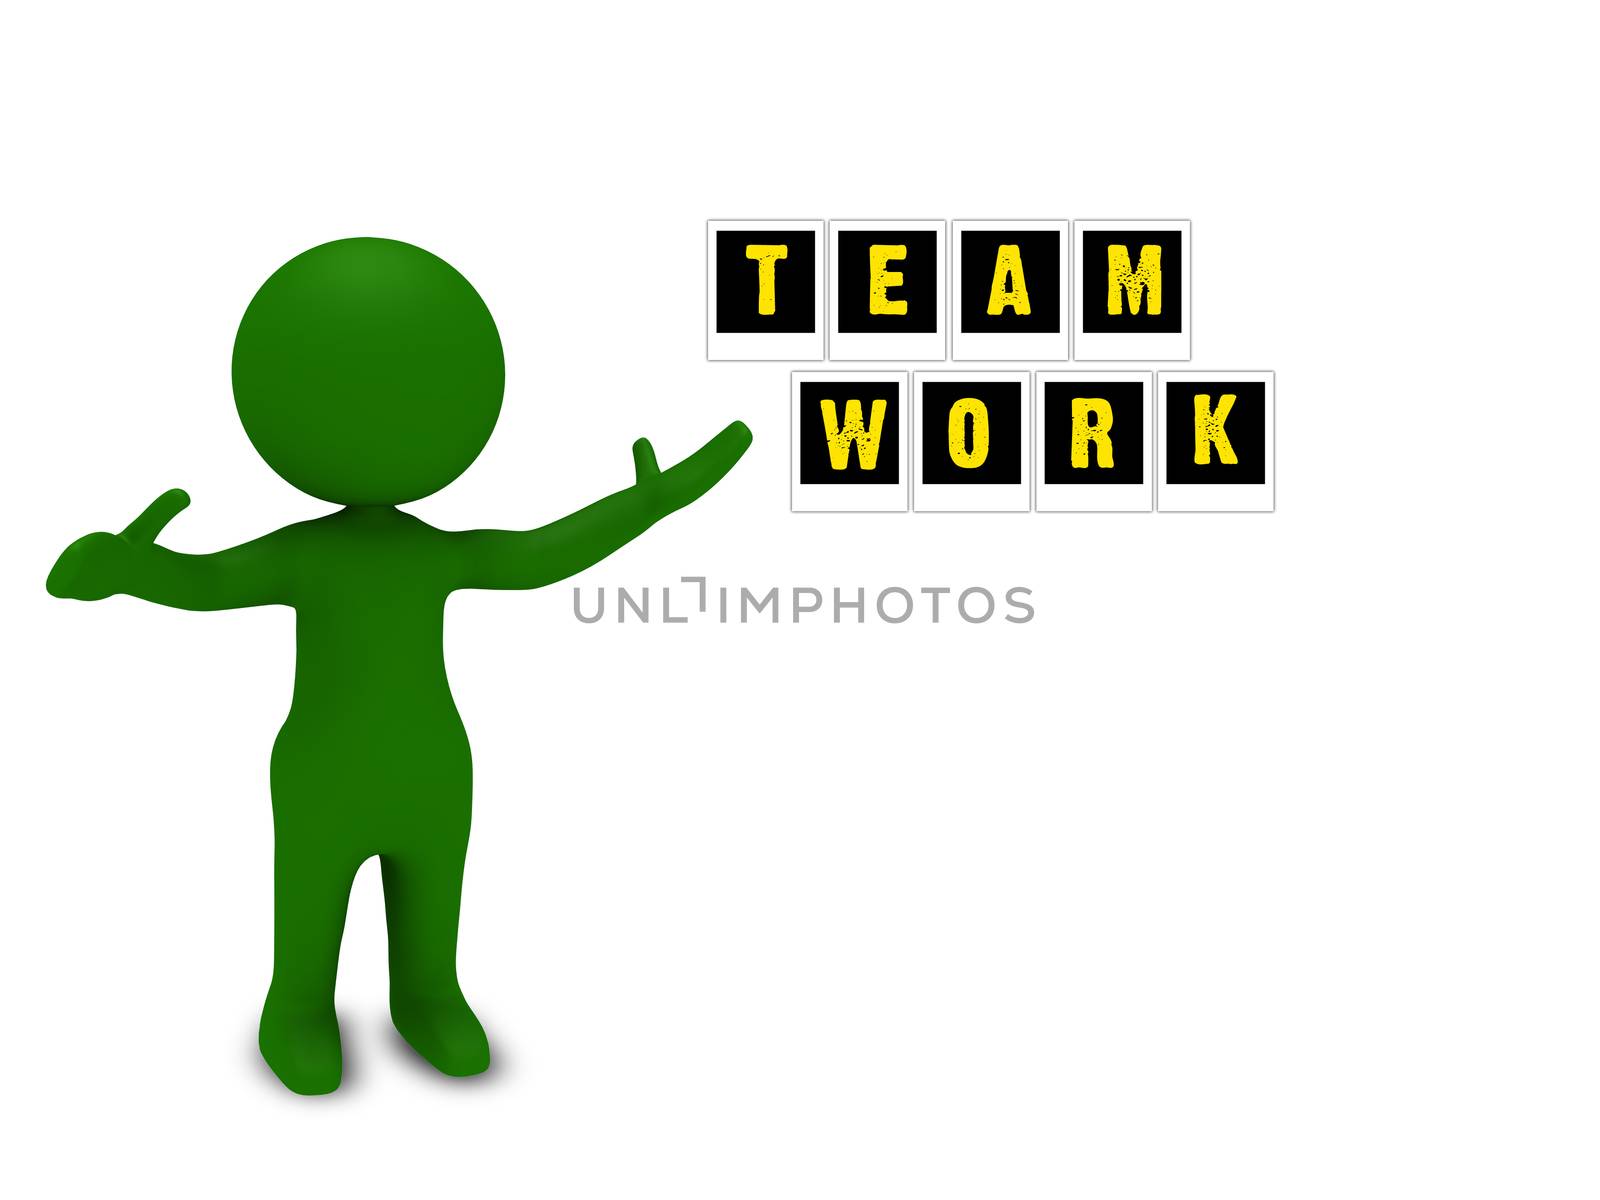 3d green character with teamwork text